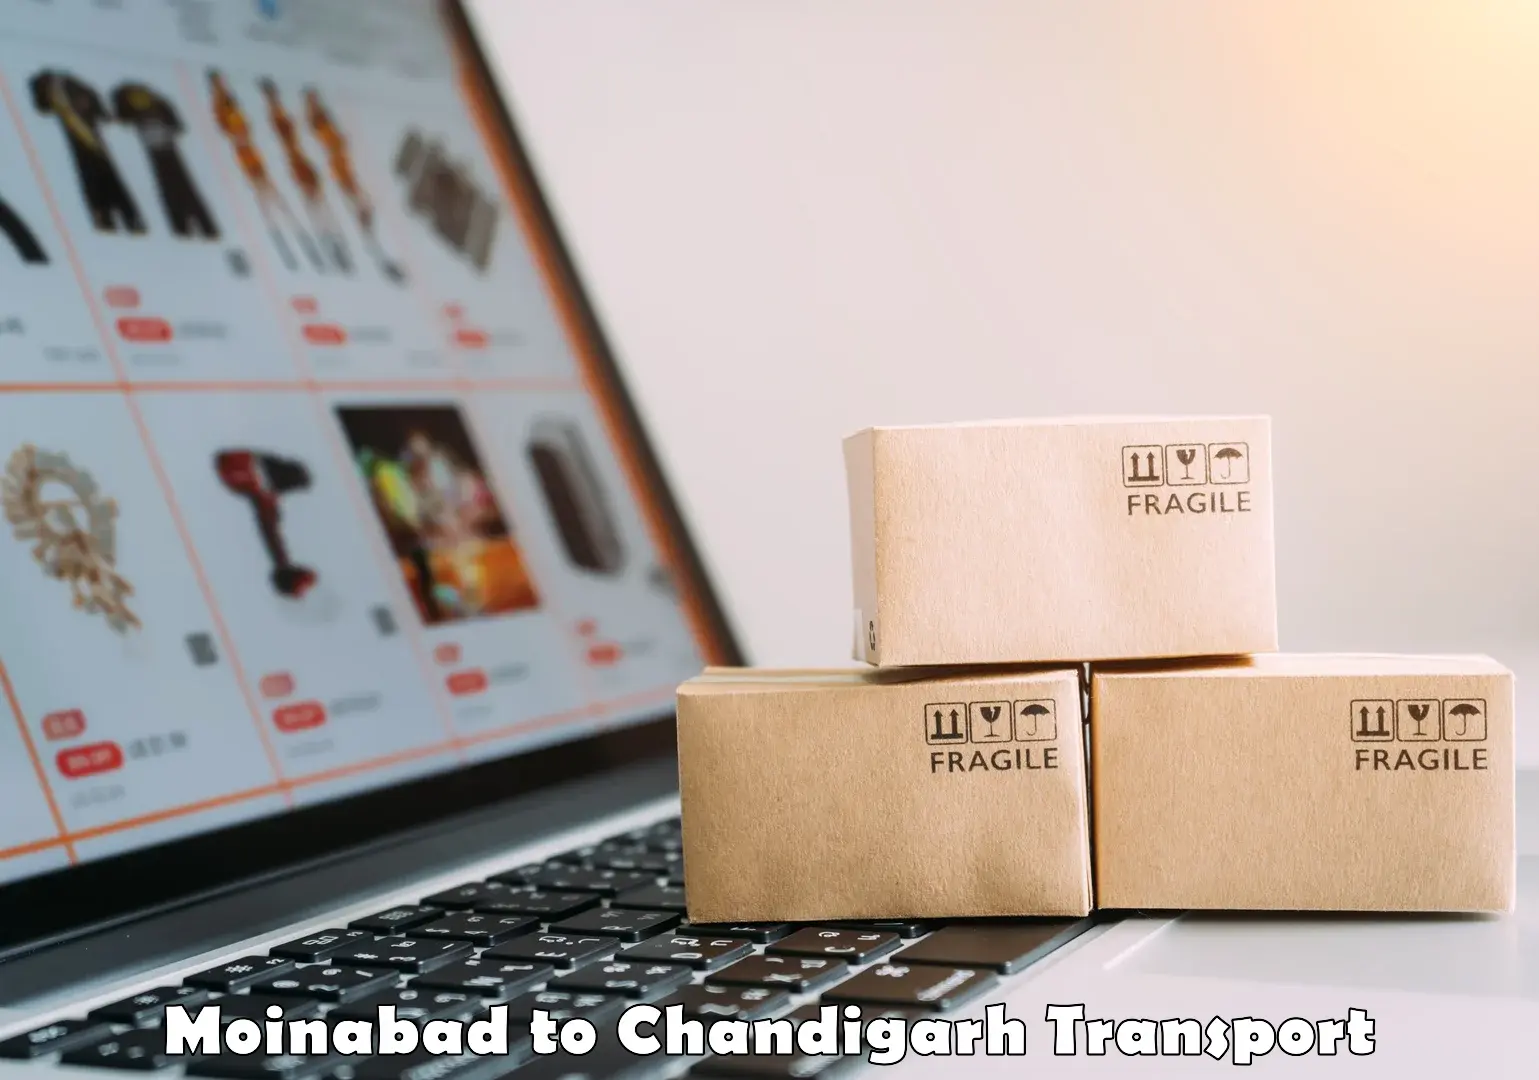 Shipping partner Moinabad to Chandigarh